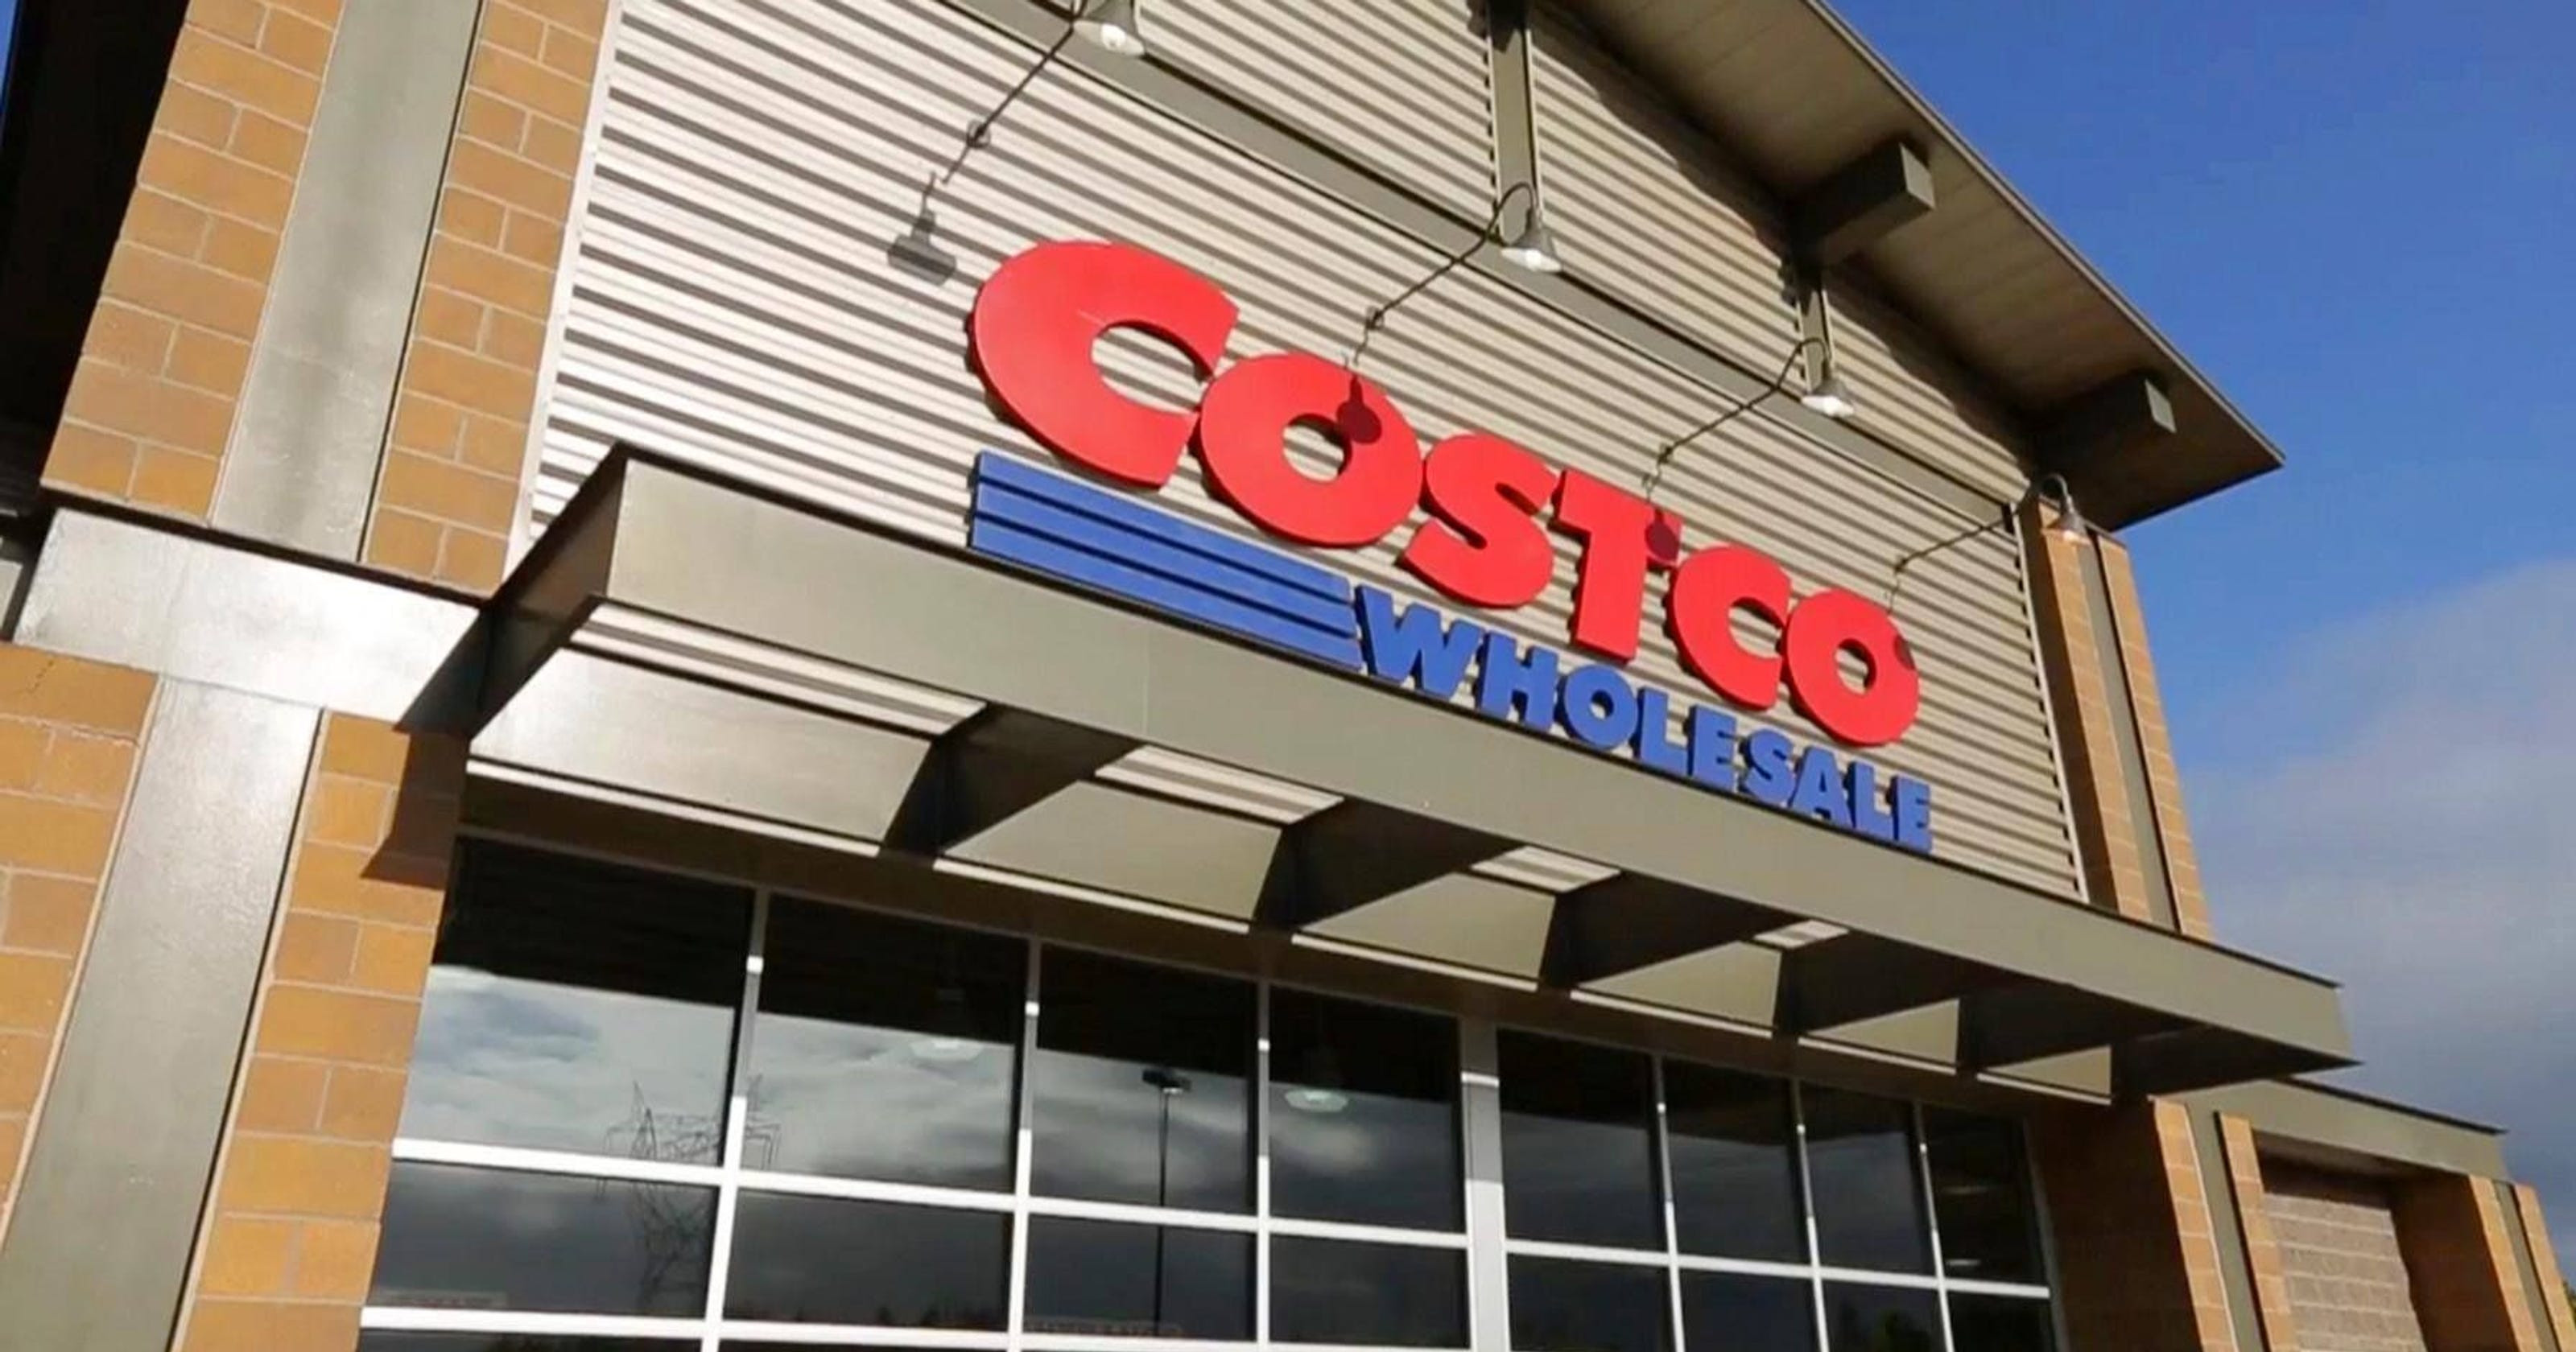 Costco Thanksgiving Dinner 2019
 Costco bests Amazon for Internet retail satisfaction